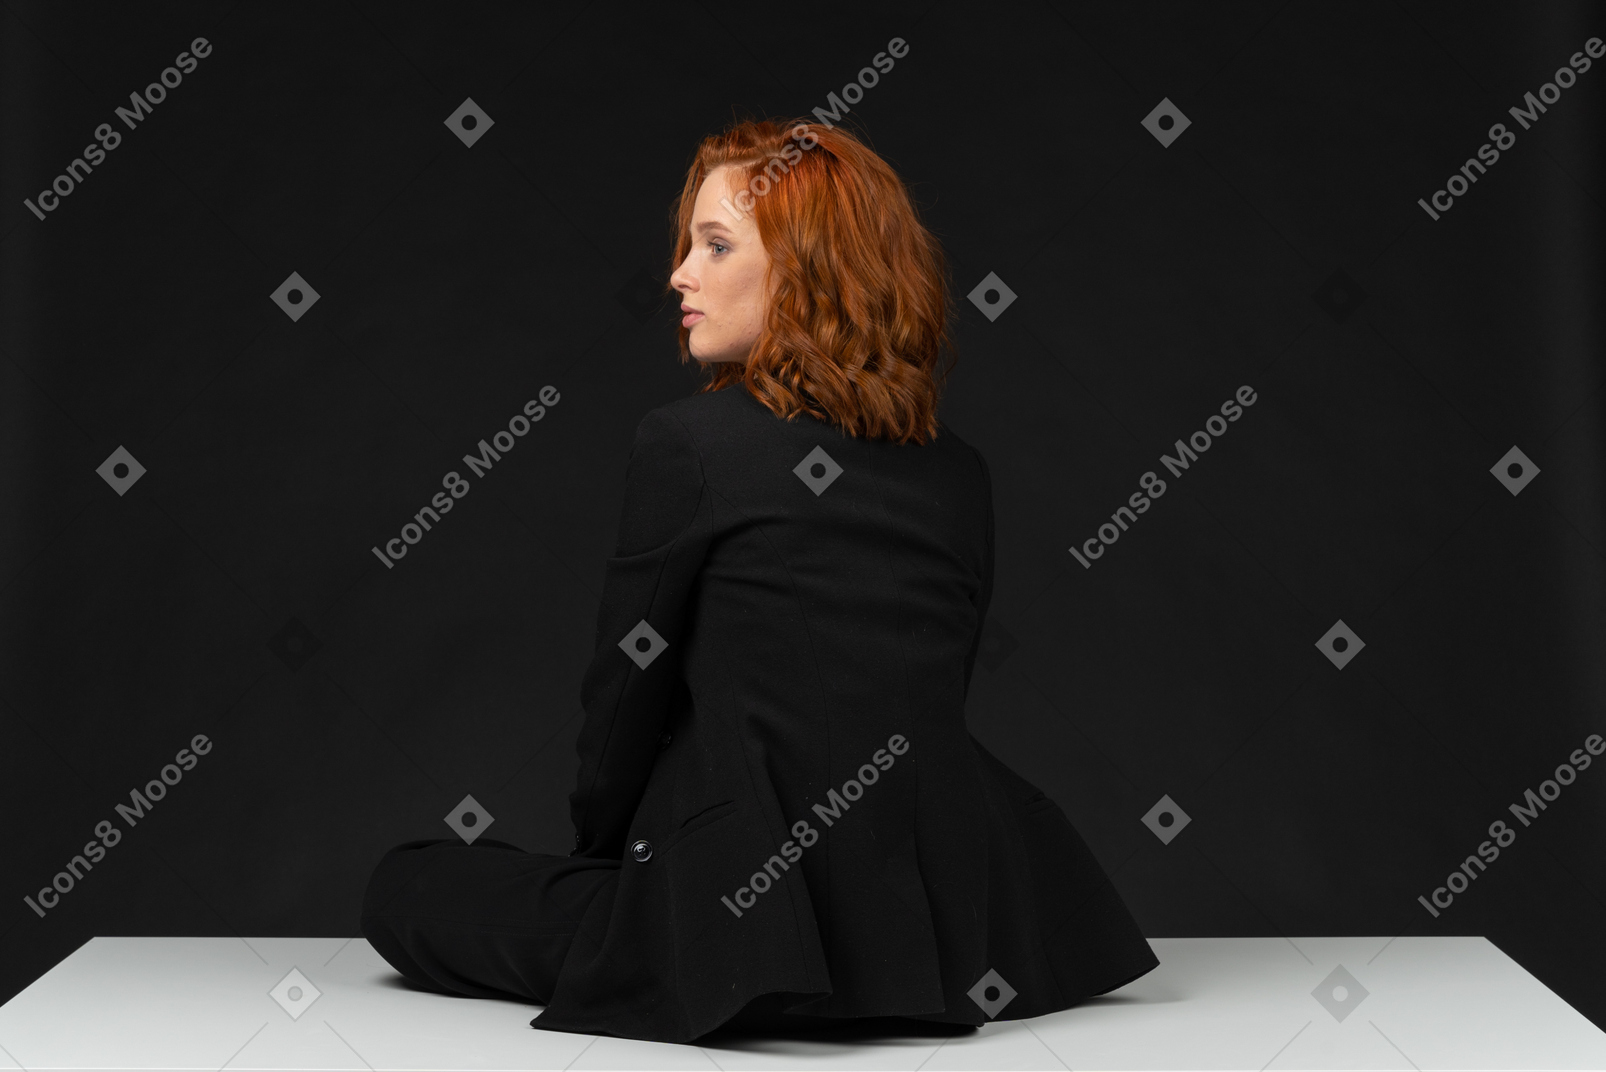 A back side view of the young woman dressed in black and sitting on the table